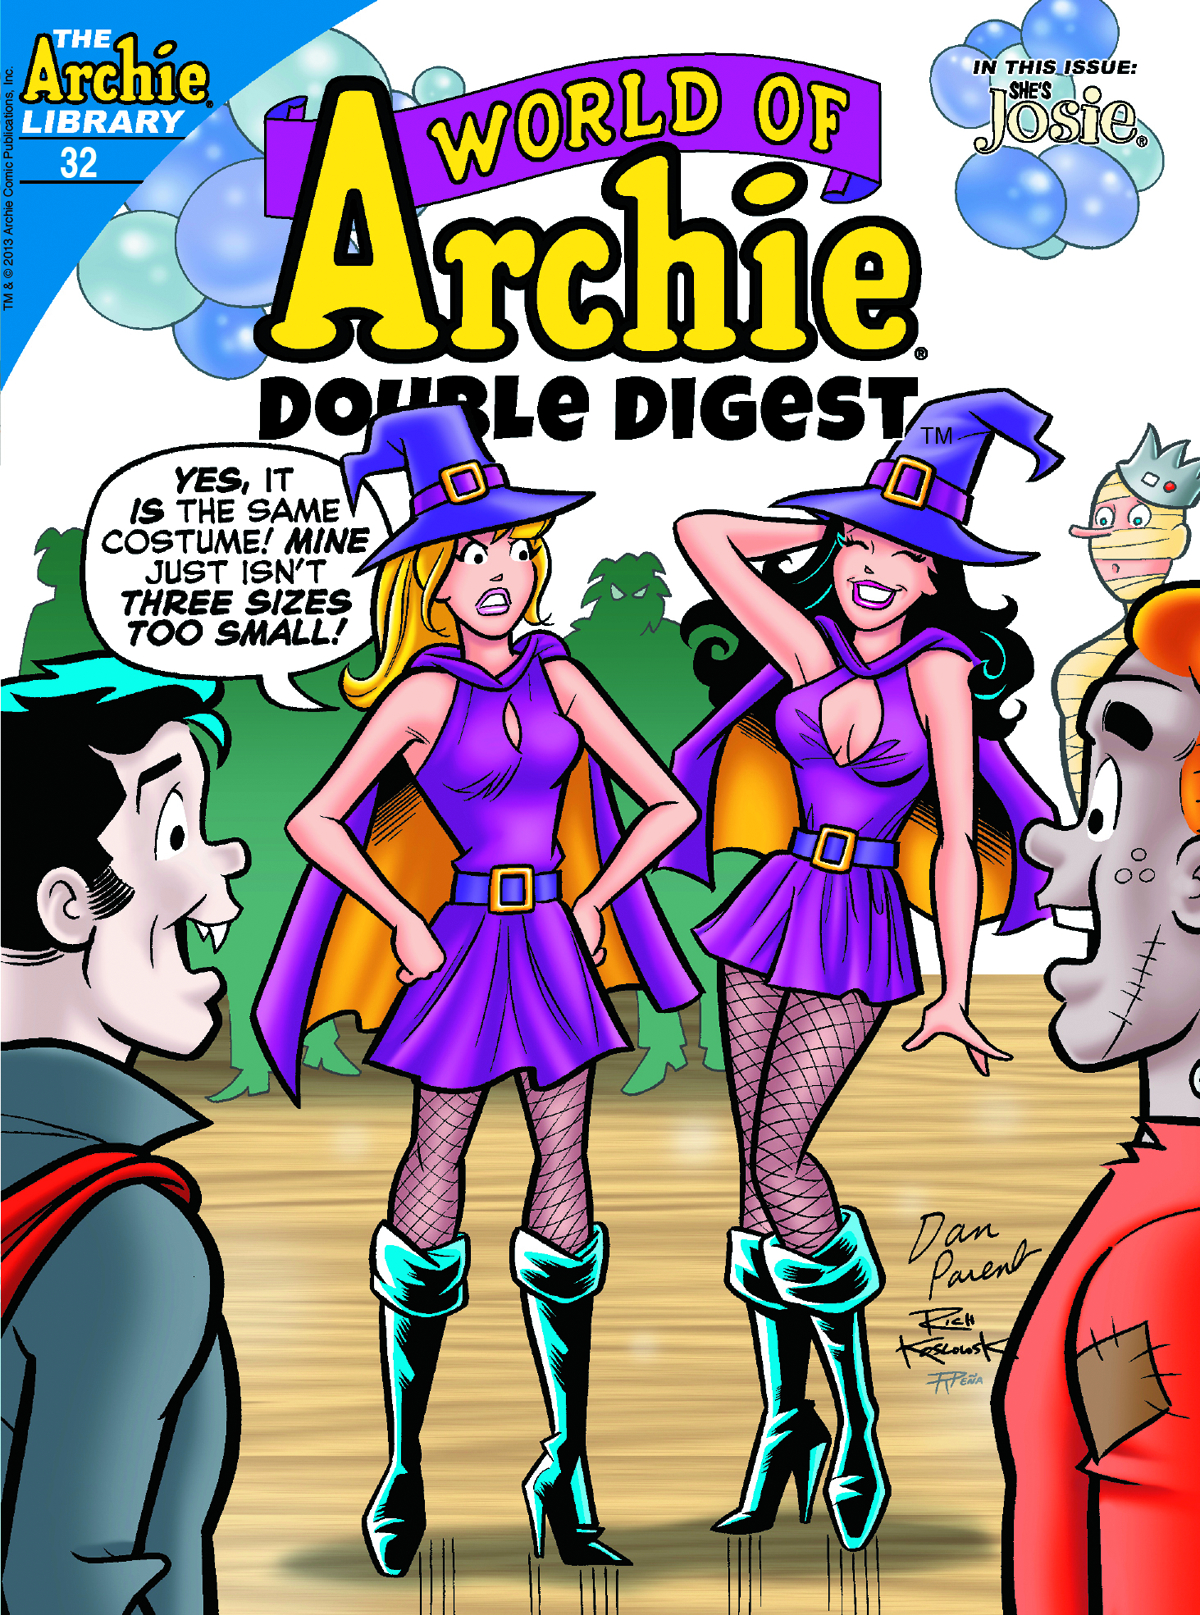 WORLD OF ARCHIE DOUBLE DIGEST #32